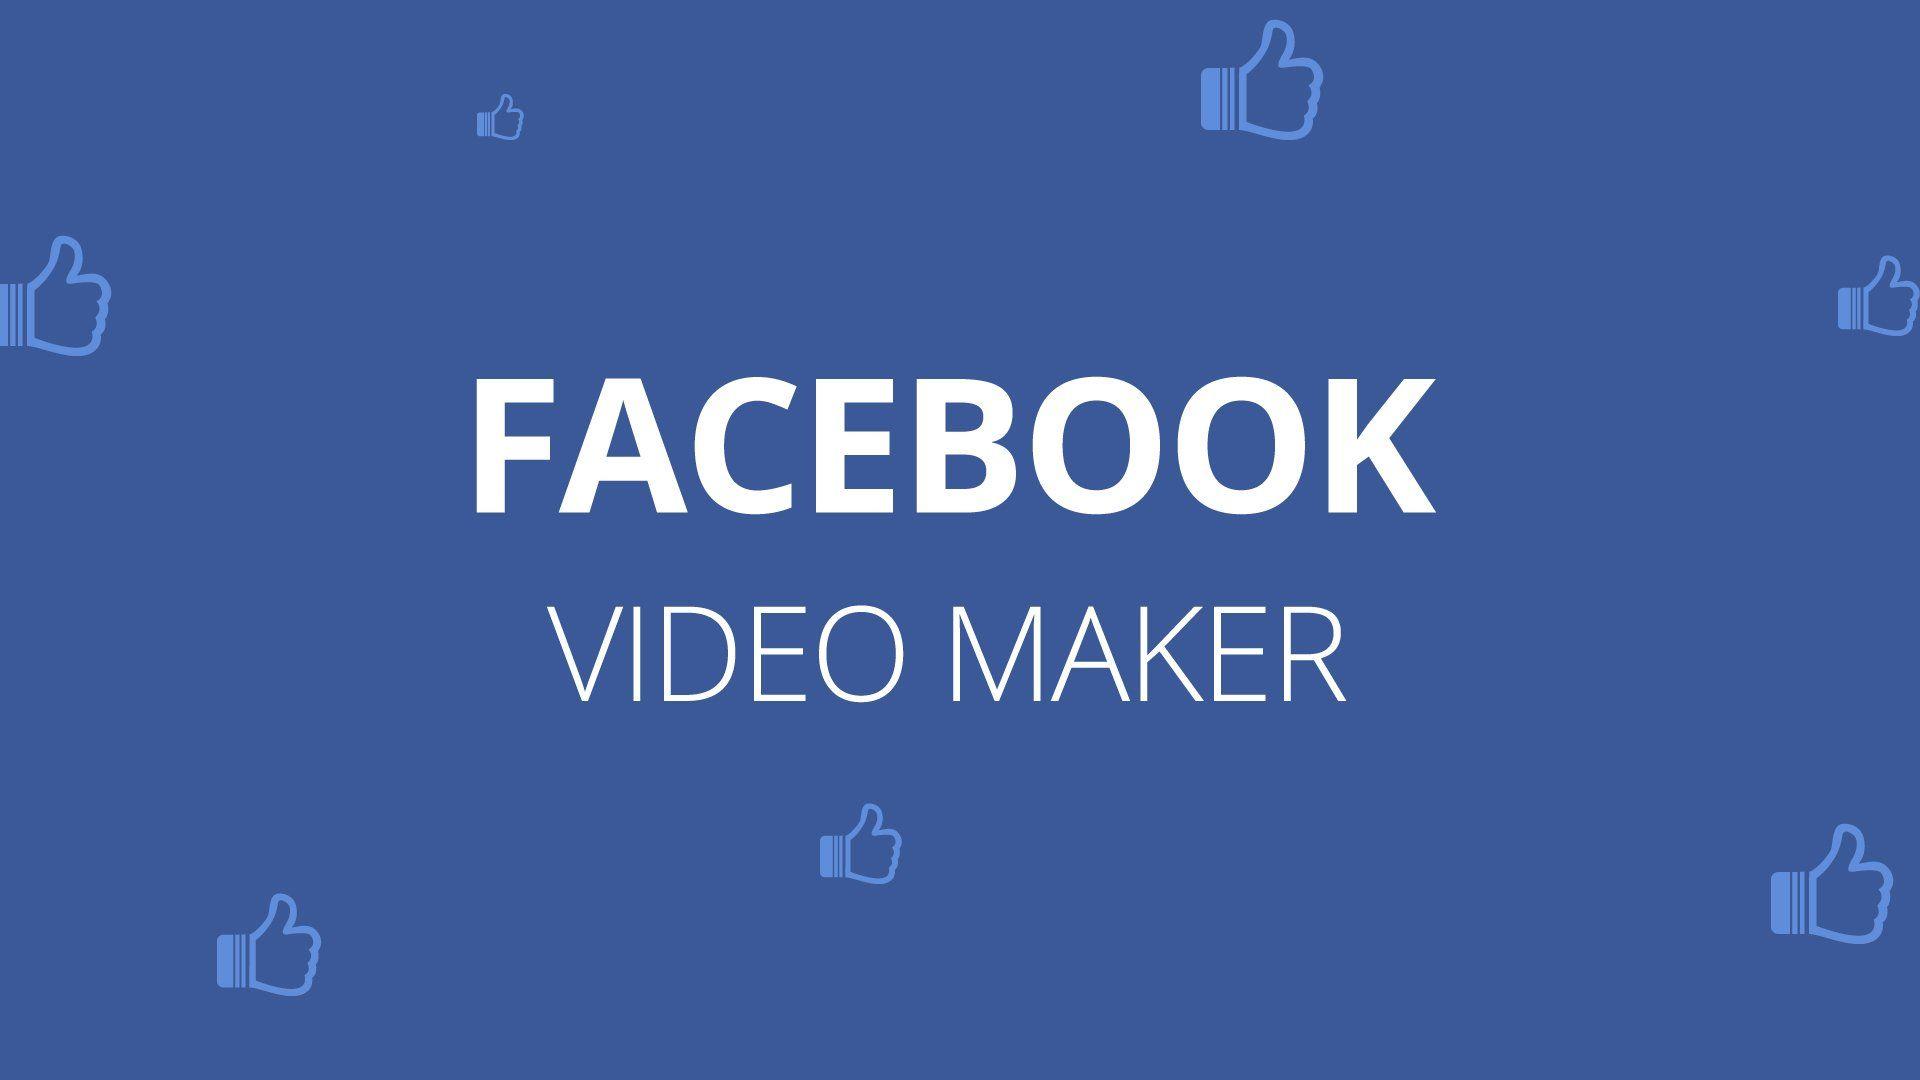 Facebook New Word Logo - Facebook Video Maker: Create animated videos for free!